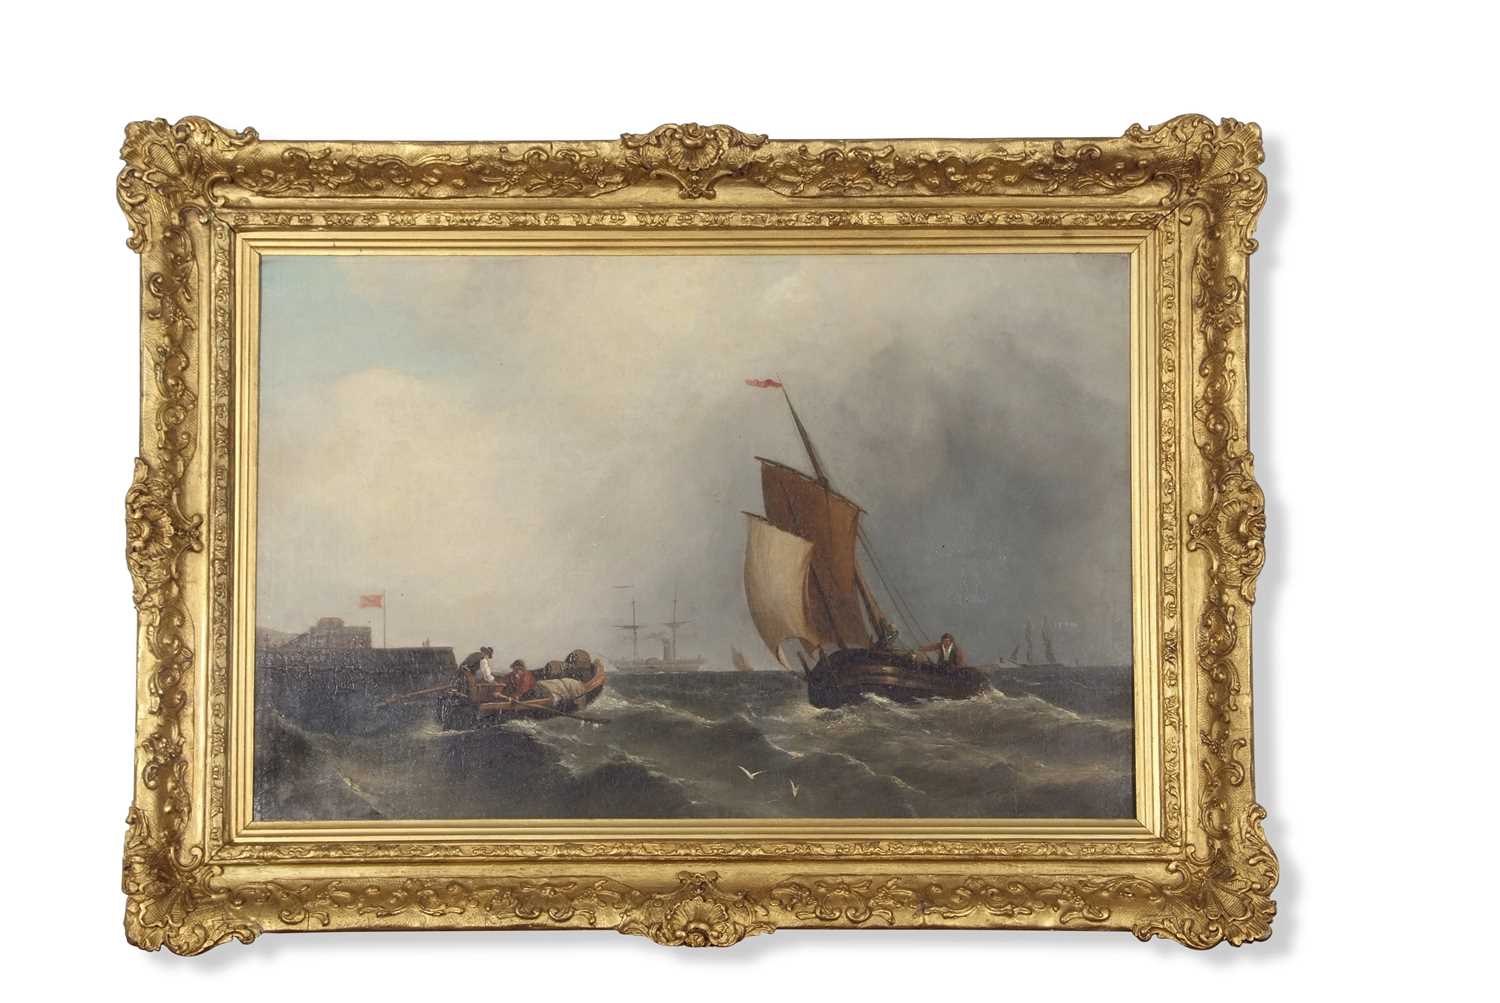 Attributed to Clarkson Frederick Stanfield (British, 1793-1867), Coastal Scene, oil on canvas,